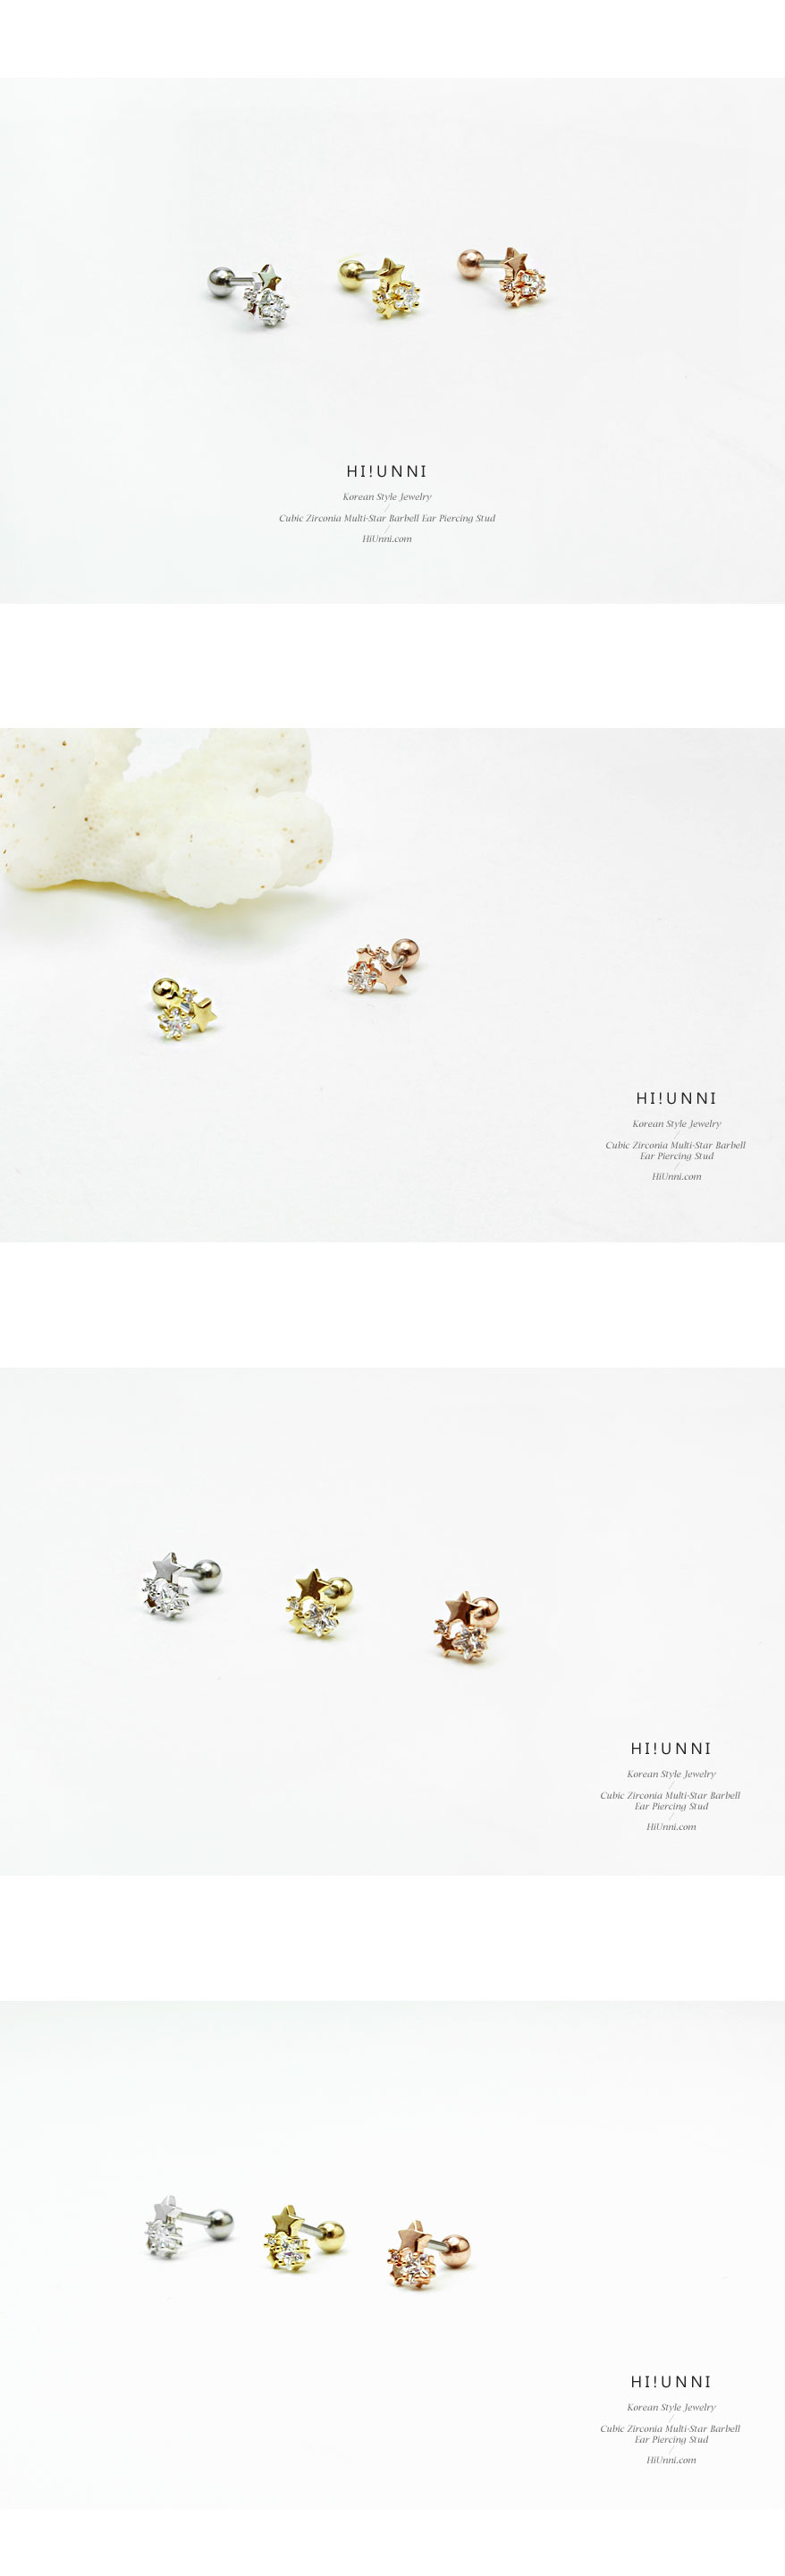 ear_studs_piercing_Cartilage_earrings_16g_316l_Surgical_Stainless_Steel_korean_asian_style_jewelry_barbell_cubic_zirconia_cz_star_3